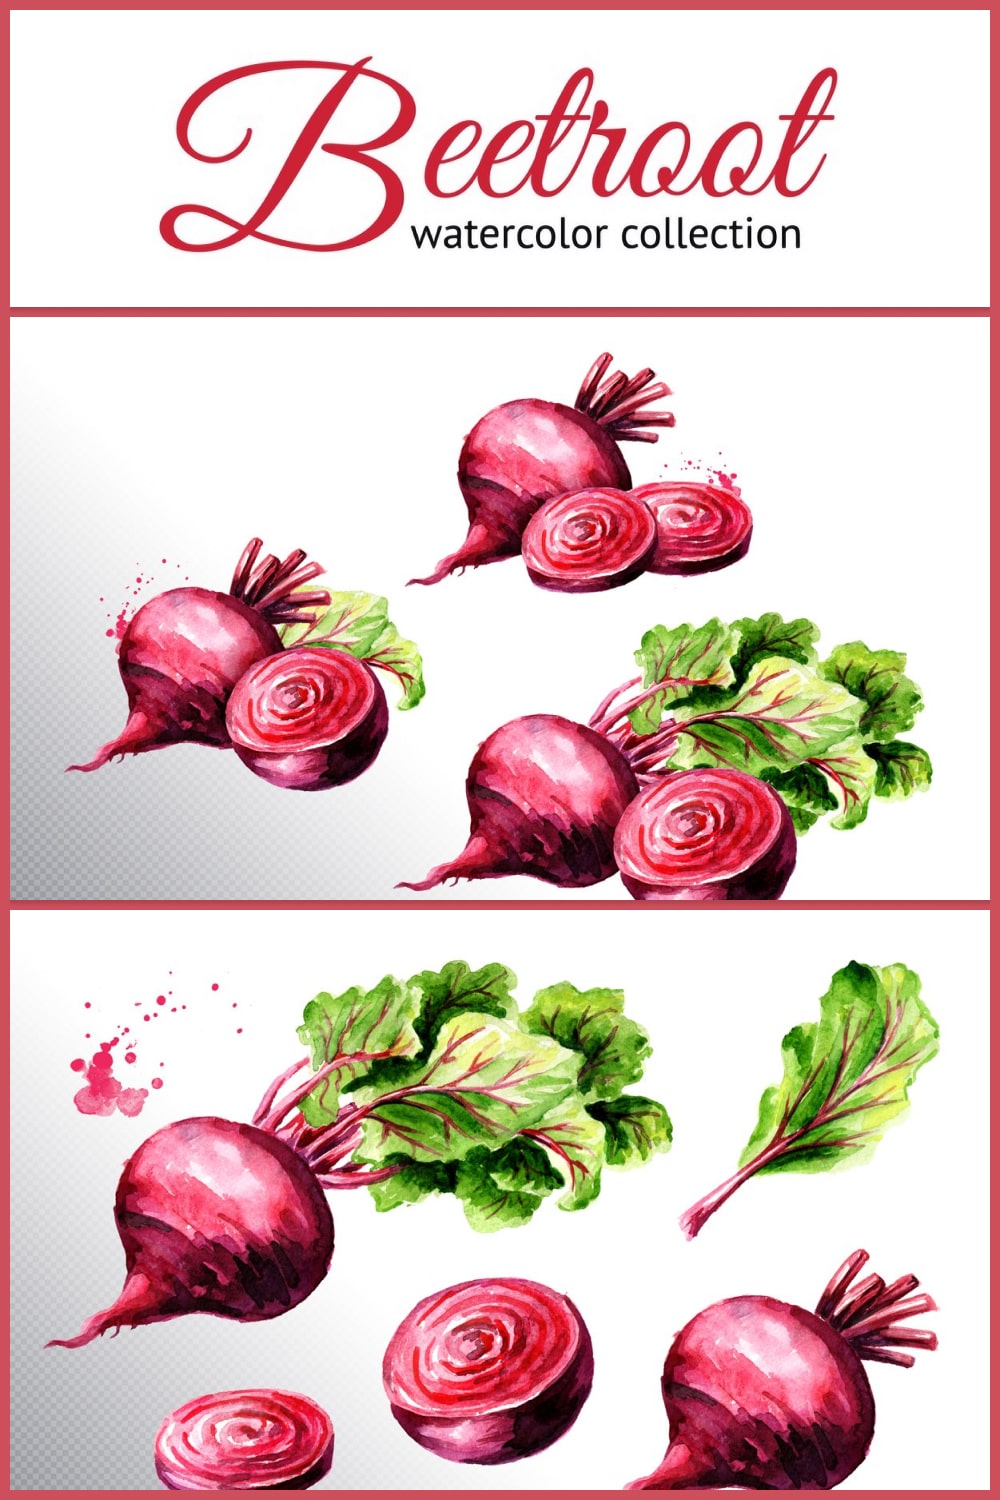 beet root. watercolor collection 03 min